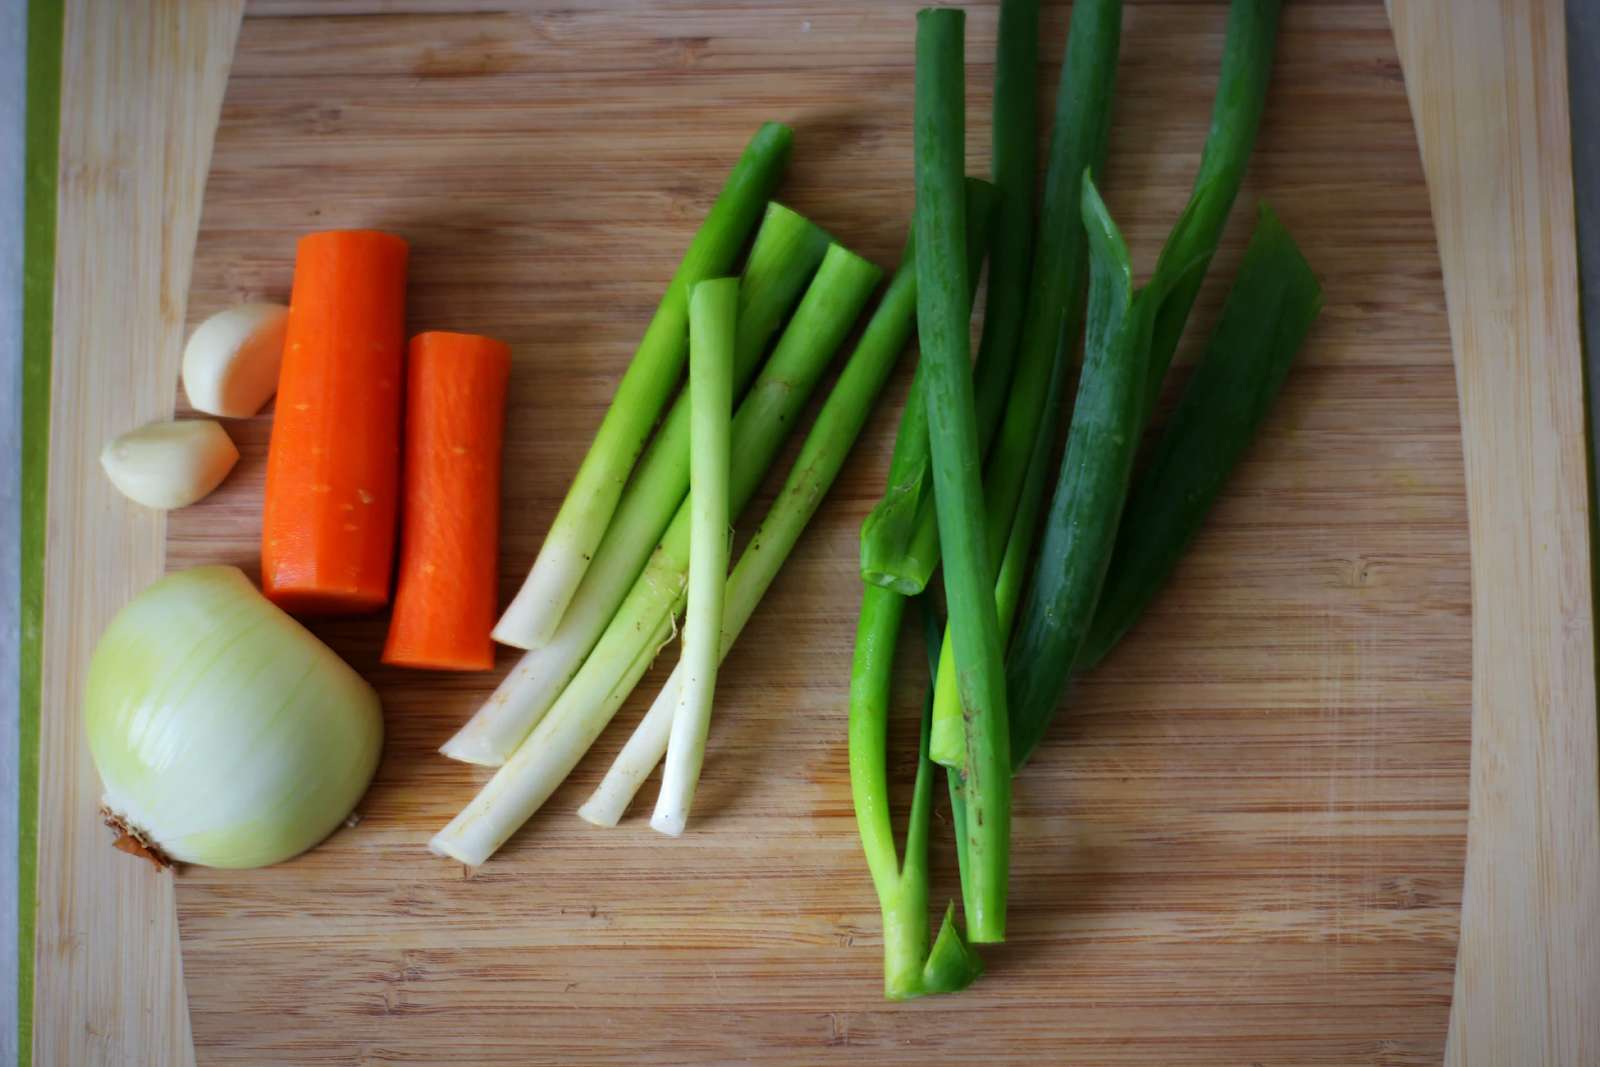 Onions, garlic, carrots and green onions on a wooden cutting board.